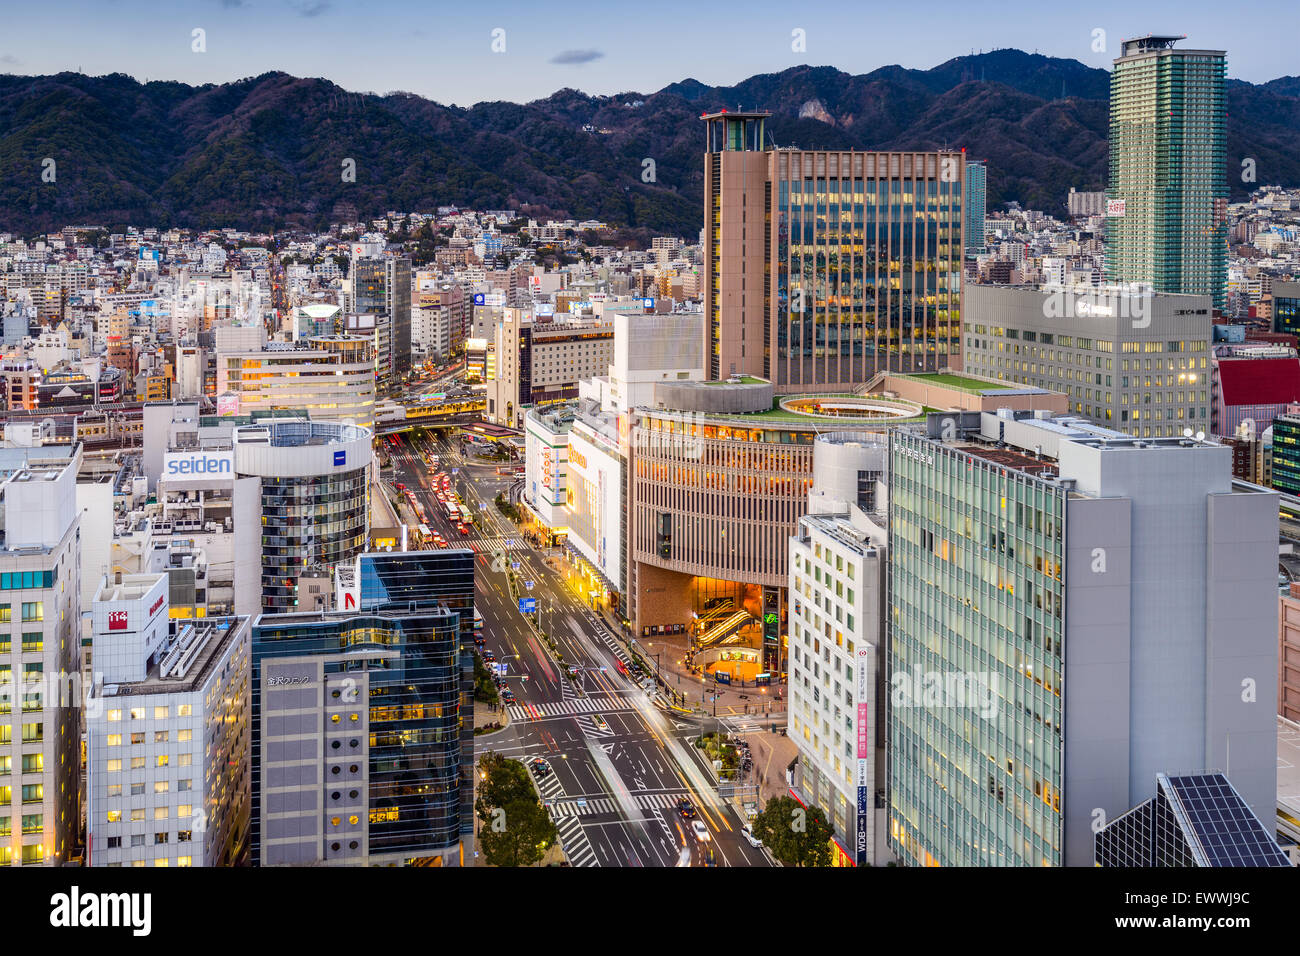 KOBE, JAPAN - JANUARY 25, 2013: Sannomiya district of Kobe. It is the largest downtown district in the city. Stock Photo